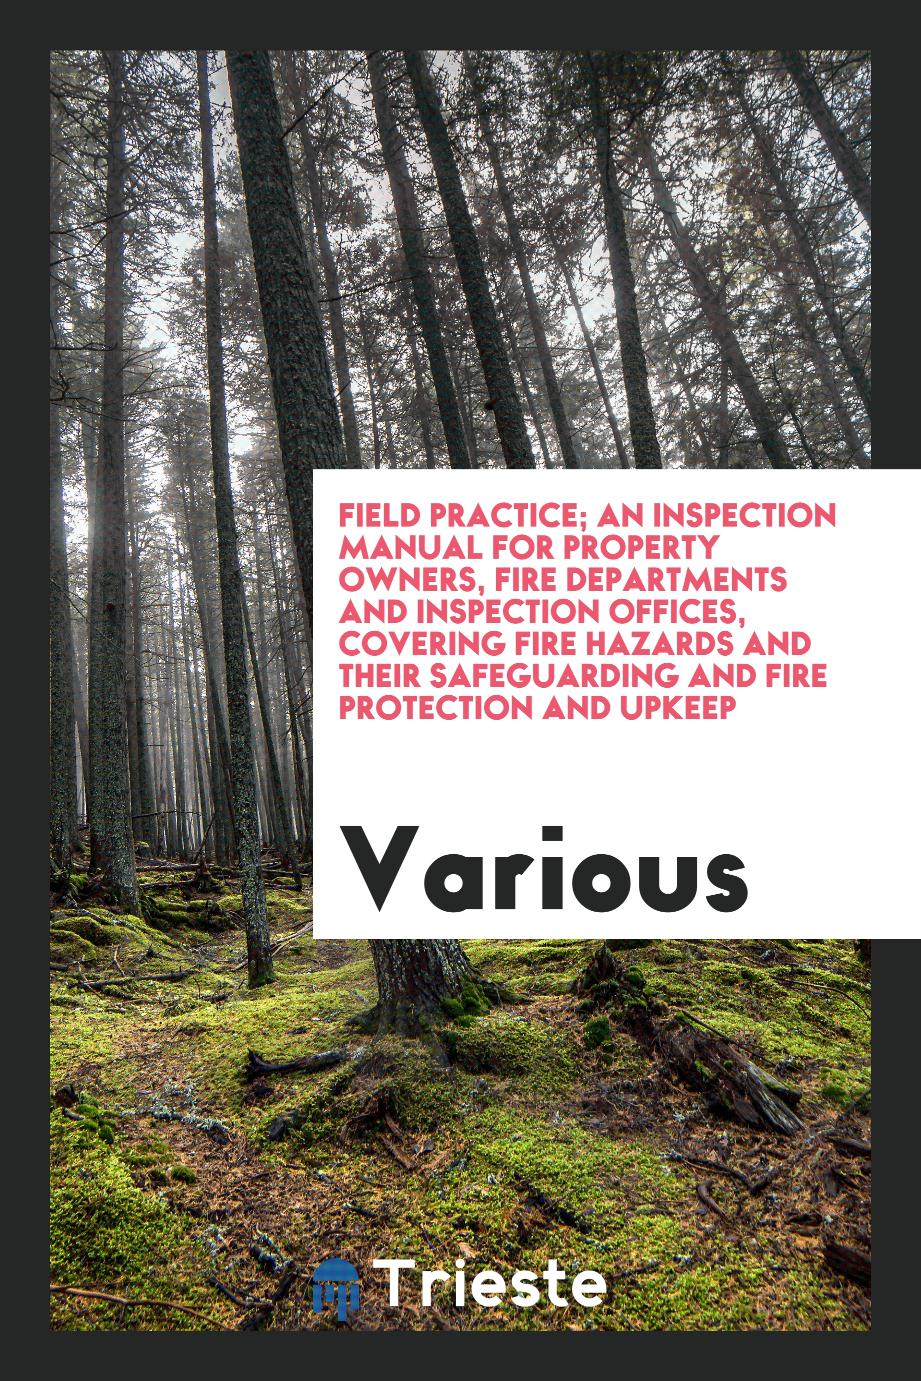 Field practice; an inspection manual for property owners, fire departments and inspection offices, covering fire hazards and their safeguarding and fire protection and upkeep